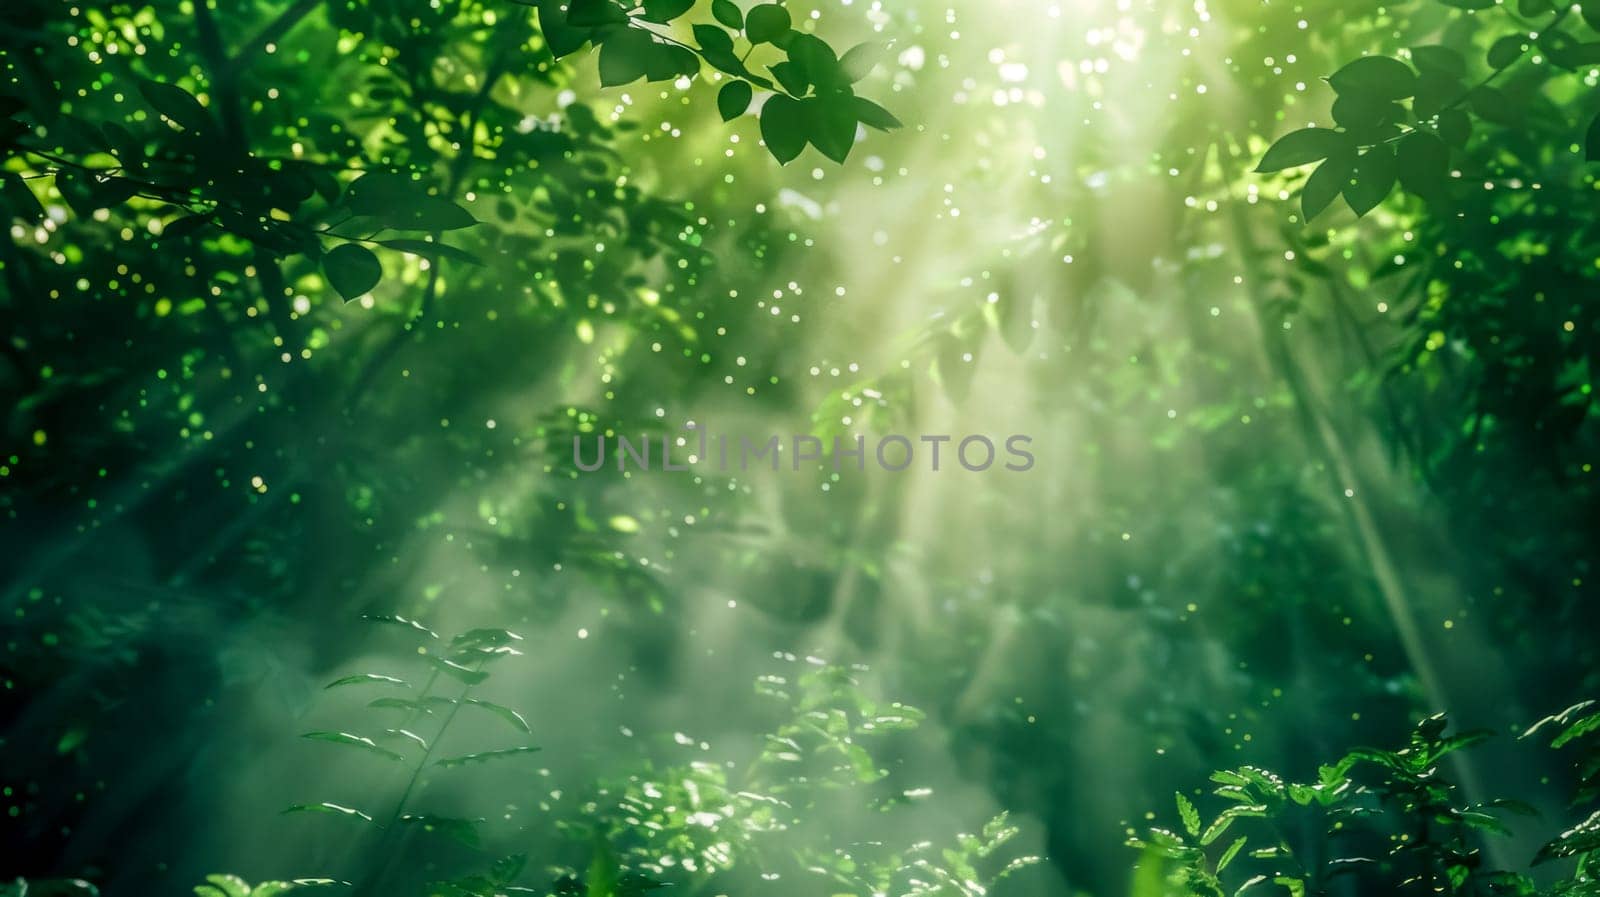 Mystical and enchanted forest with sunbeams filtering through the lush green foliage and radiant sunlight rays, creating a peaceful and serene natural eco environment outdoors